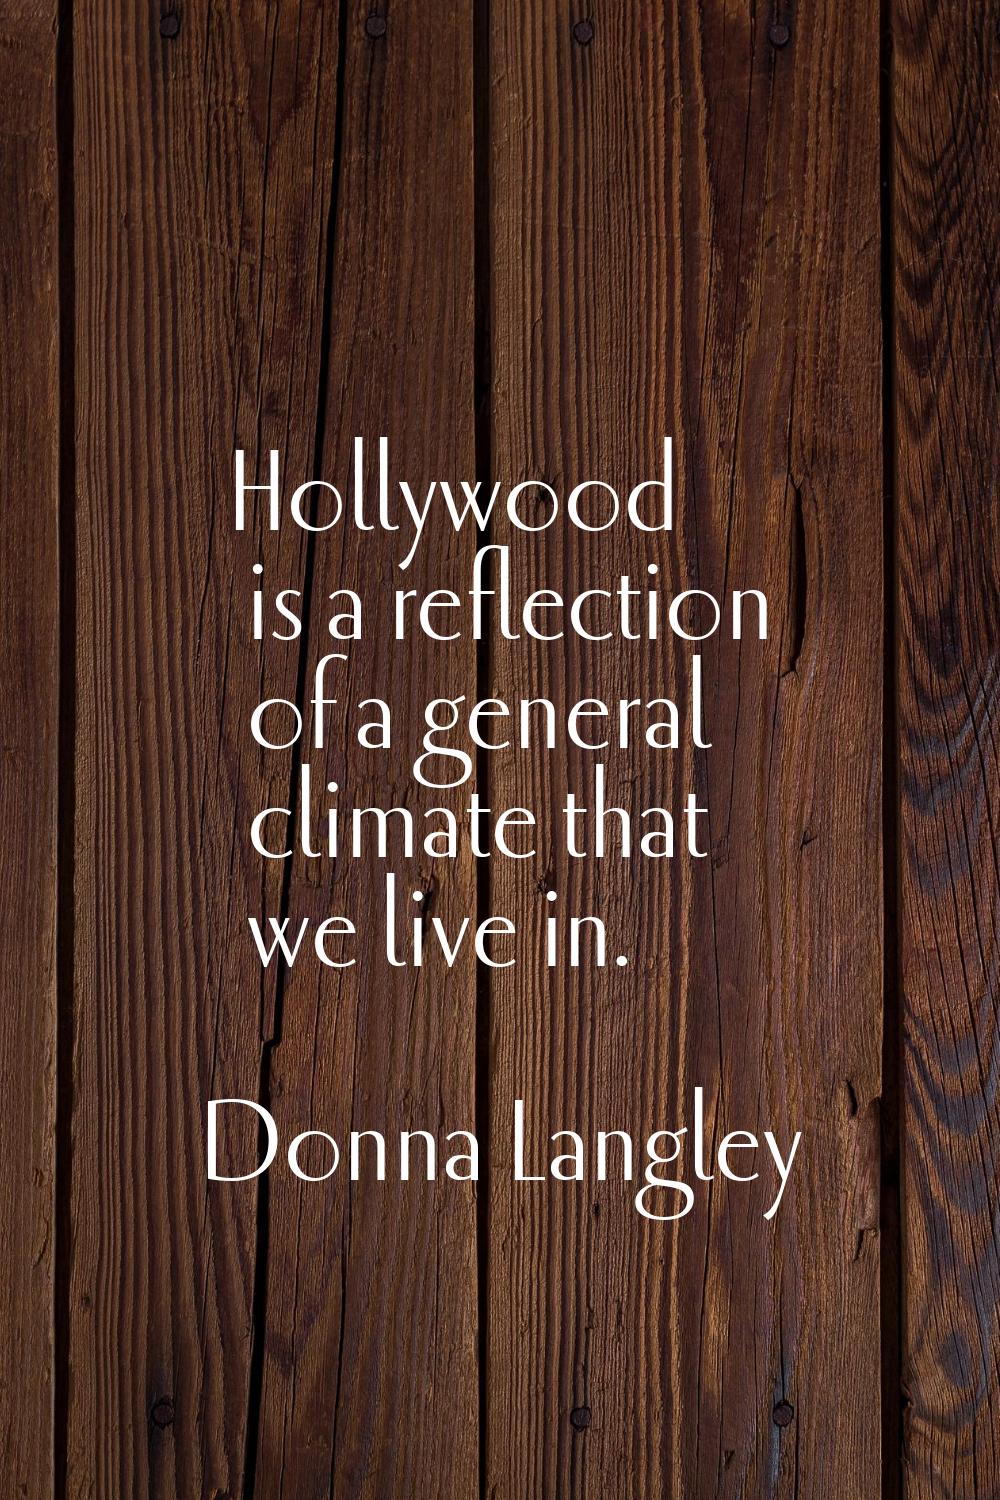 Hollywood is a reflection of a general climate that we live in.